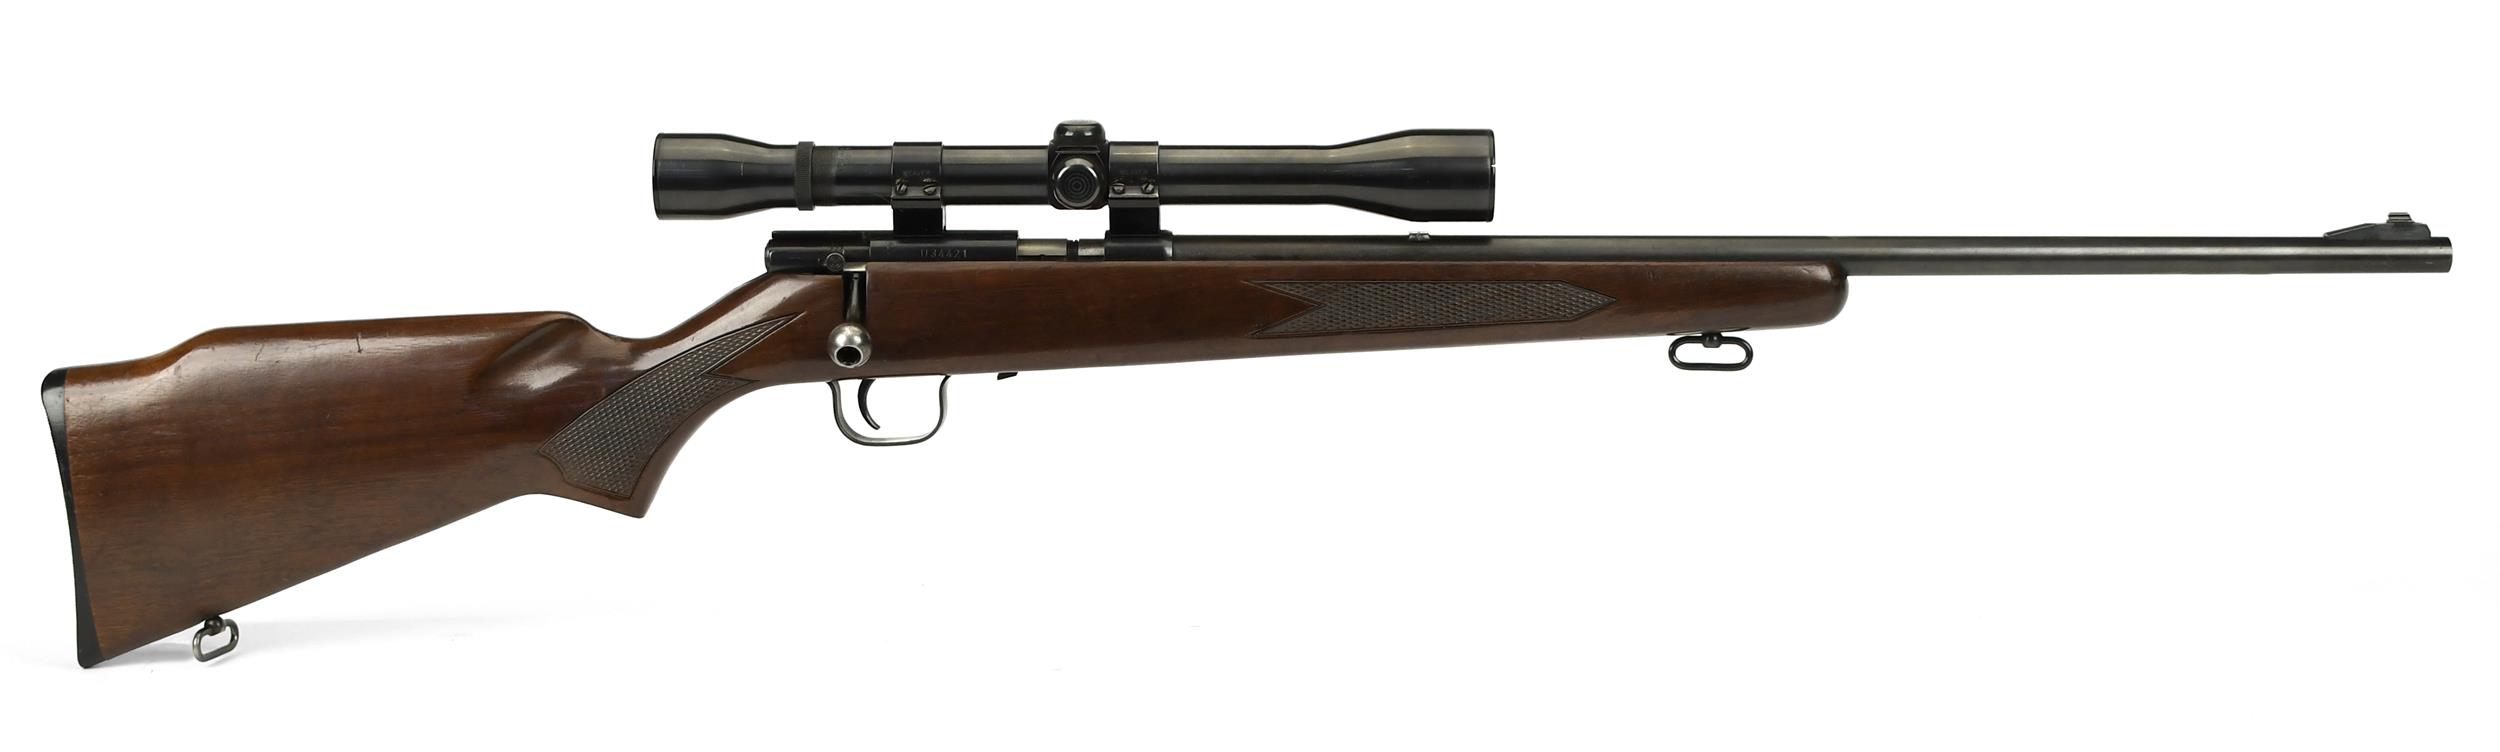 WINCHESTER MODEL 320, 22 CAL, RIFLE.